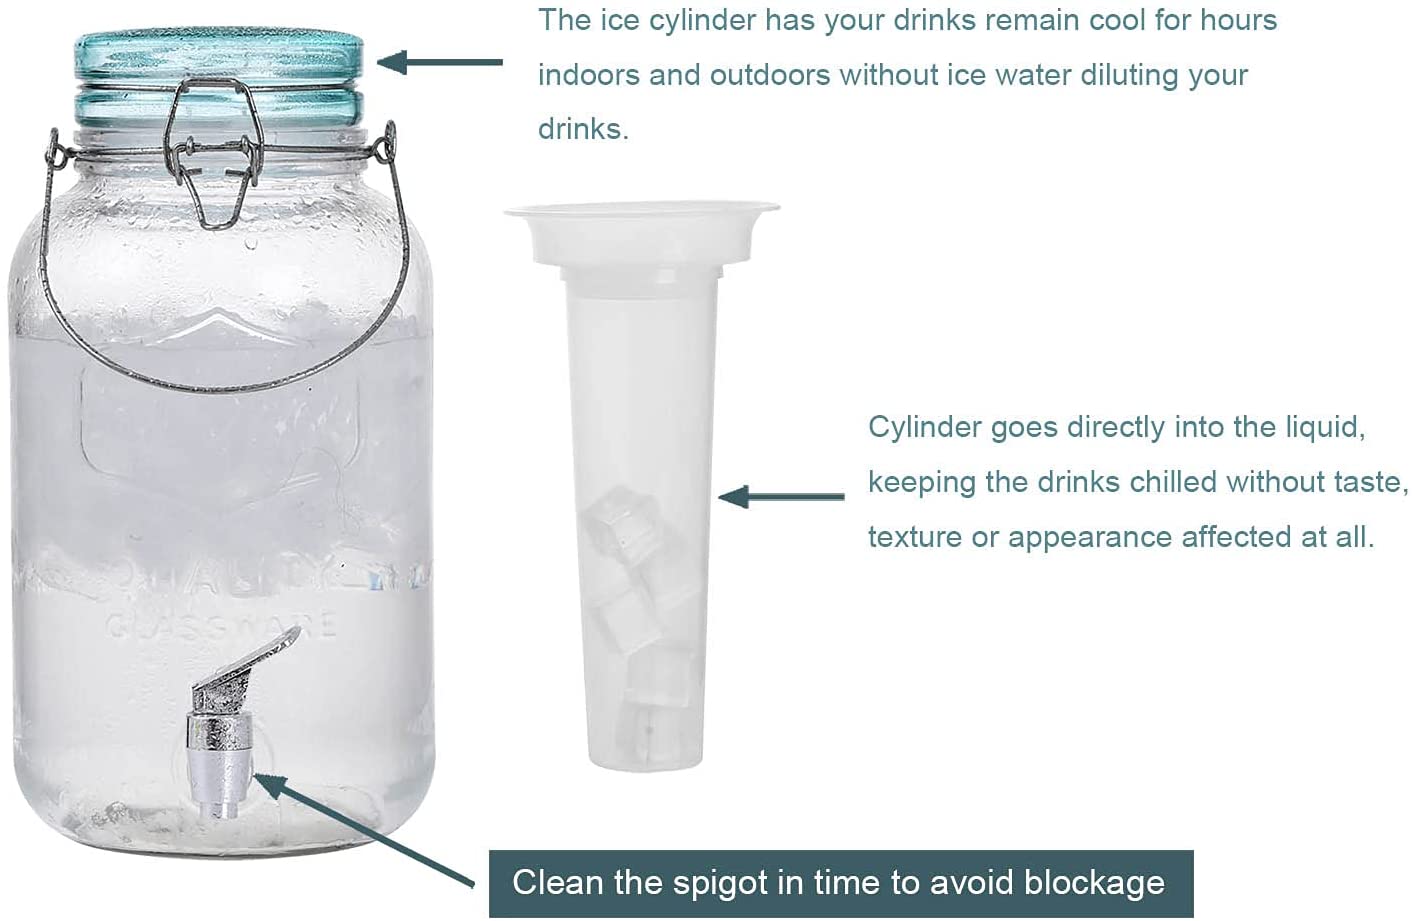 Emica Home 1 Gallon Cold Drink Glass Beverage Dispenser with Ice Infuser, Clear Bail & Trigger with Locking Clamp Drink Dispenser with Easy Flow Spigot for Outdoor, Parties and Daily Use